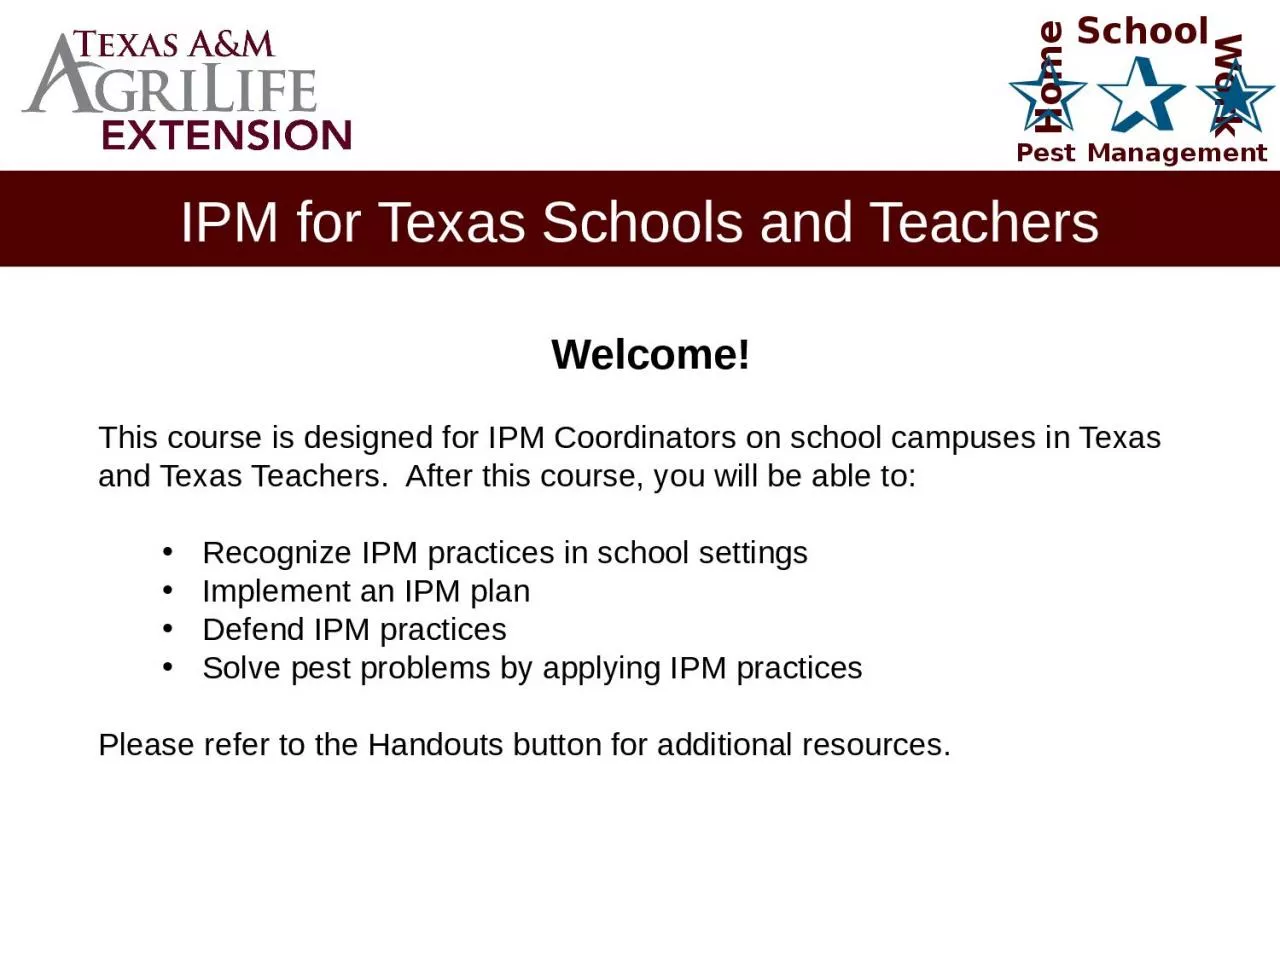 IPM for Texas Schools and Teachers